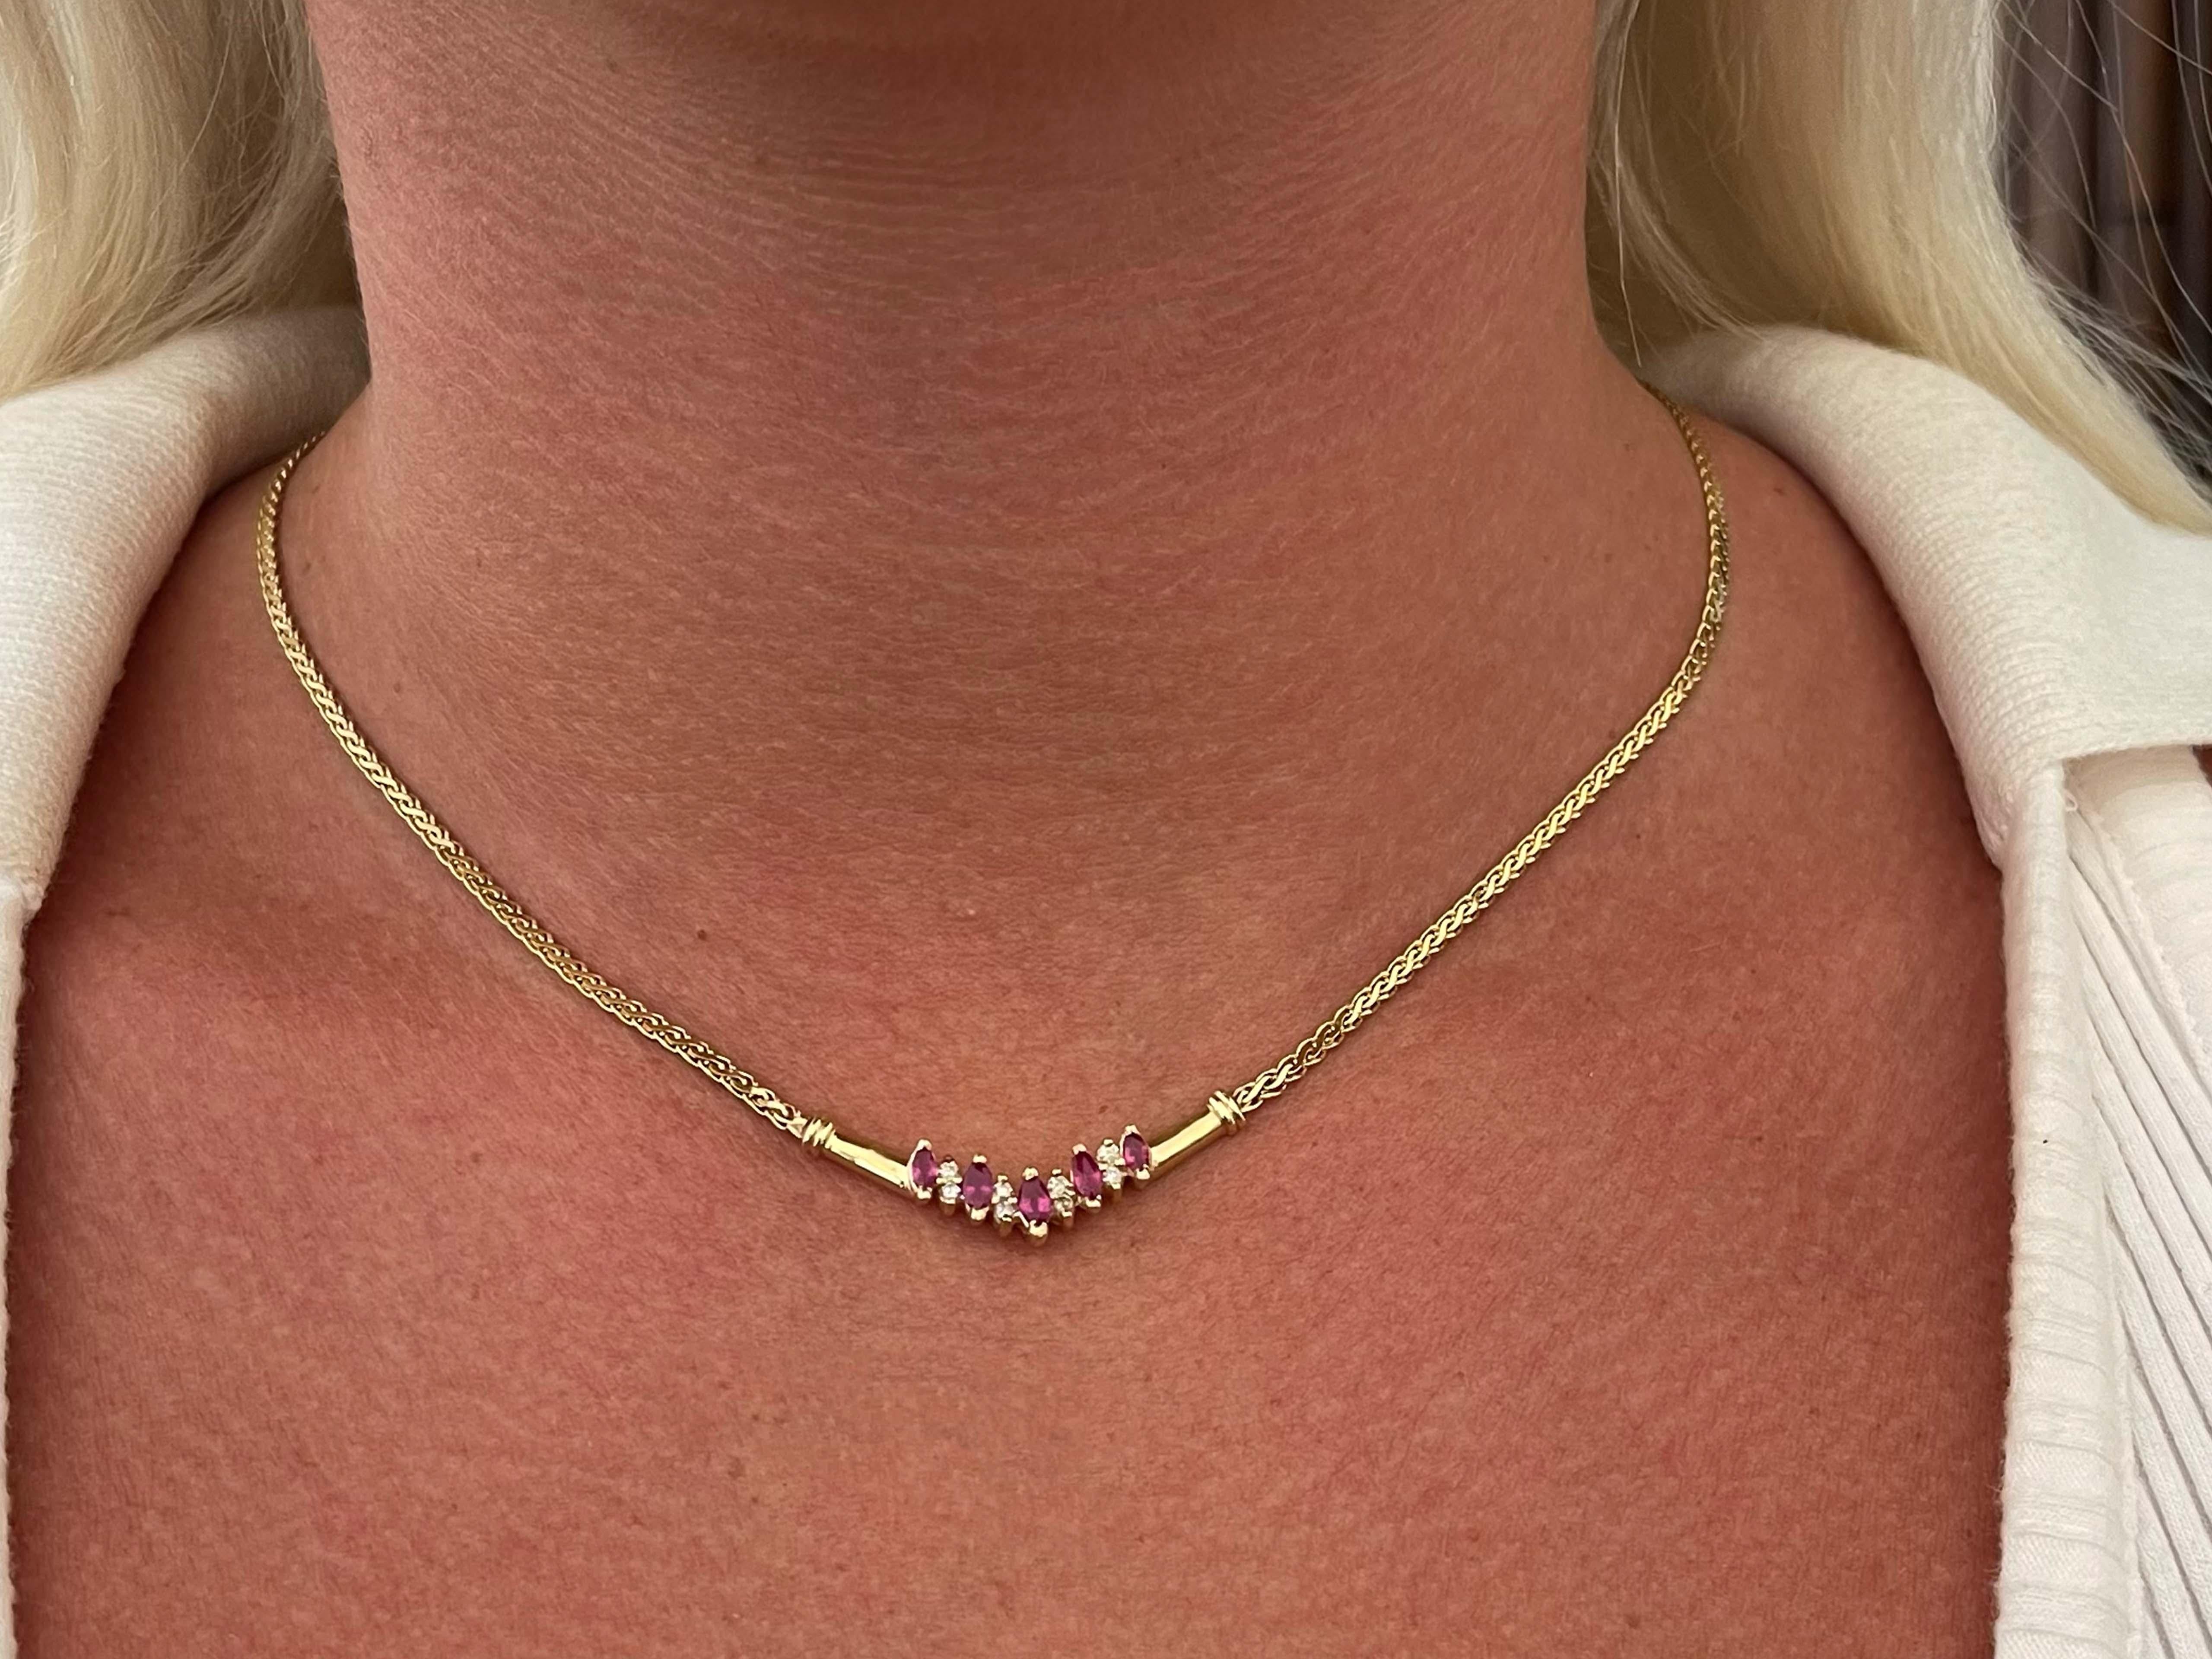 Item Specifications:
​
​Metal: 14K Yellow Gold

Total Weight: 9.8 Grams

Chain Length: 18